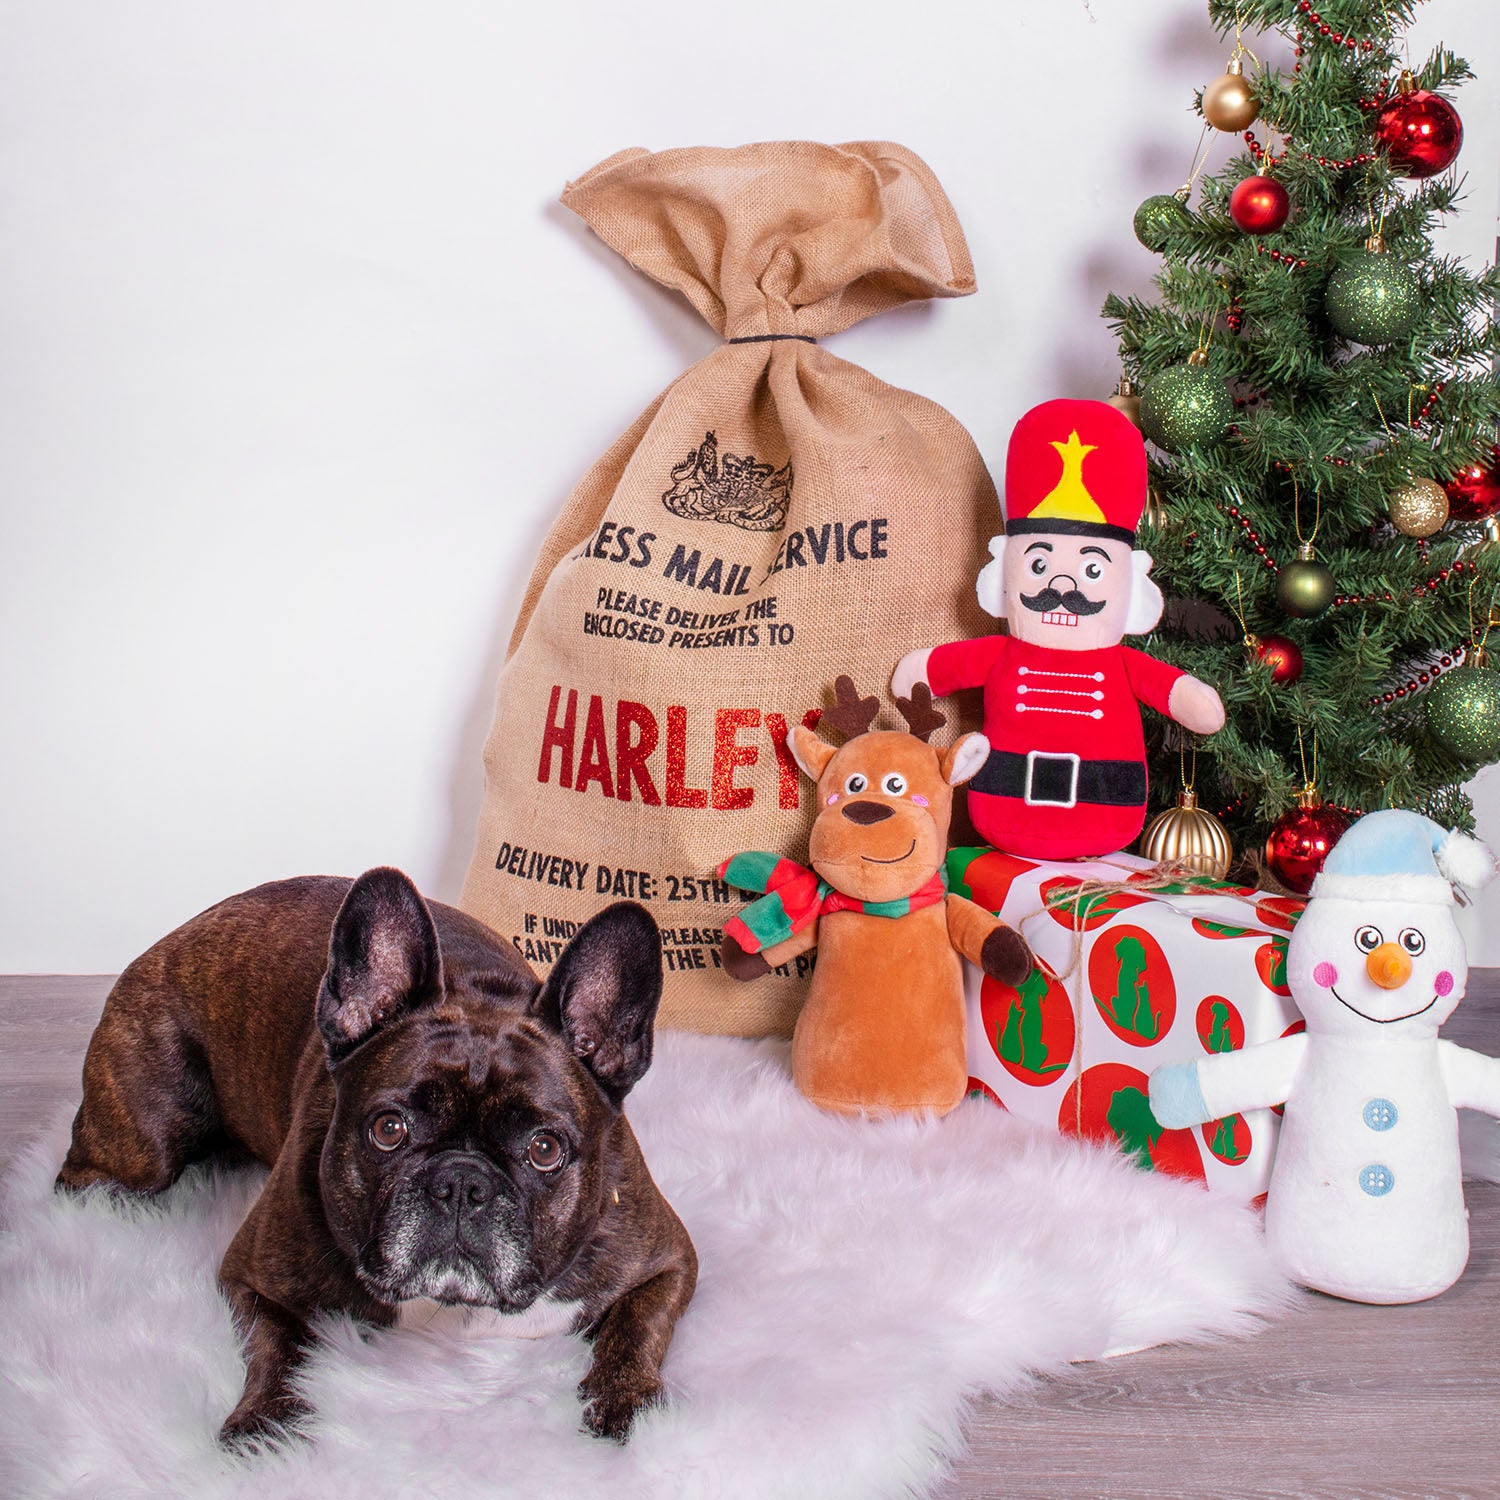 french bulldog with a reindeer snowman and nutcracker plush toys